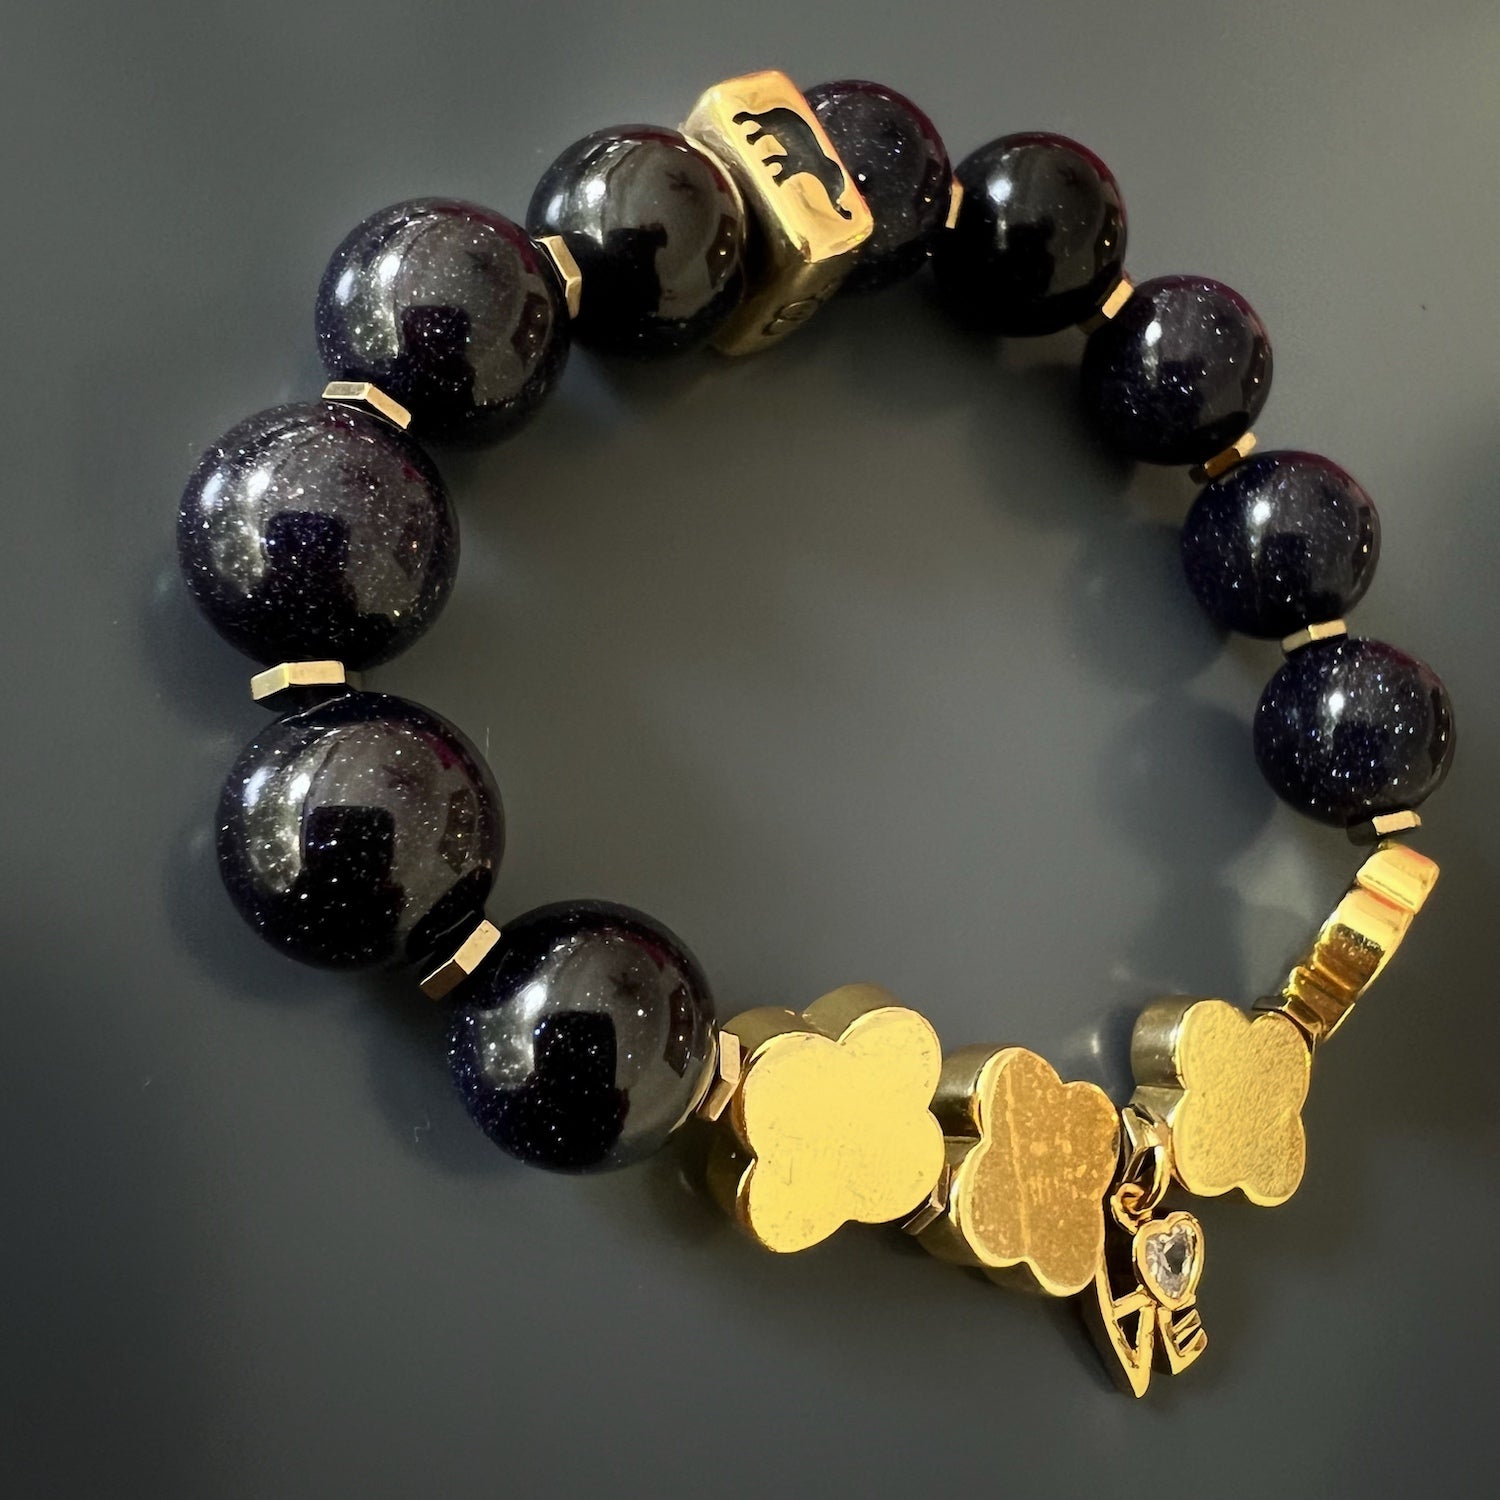 Handmade Gold Alhambra Bracelet - Striking accessory with gold hematite clover beads, gold hematite stone spacers, and an intricately designed love charm in elegant cursive writing.